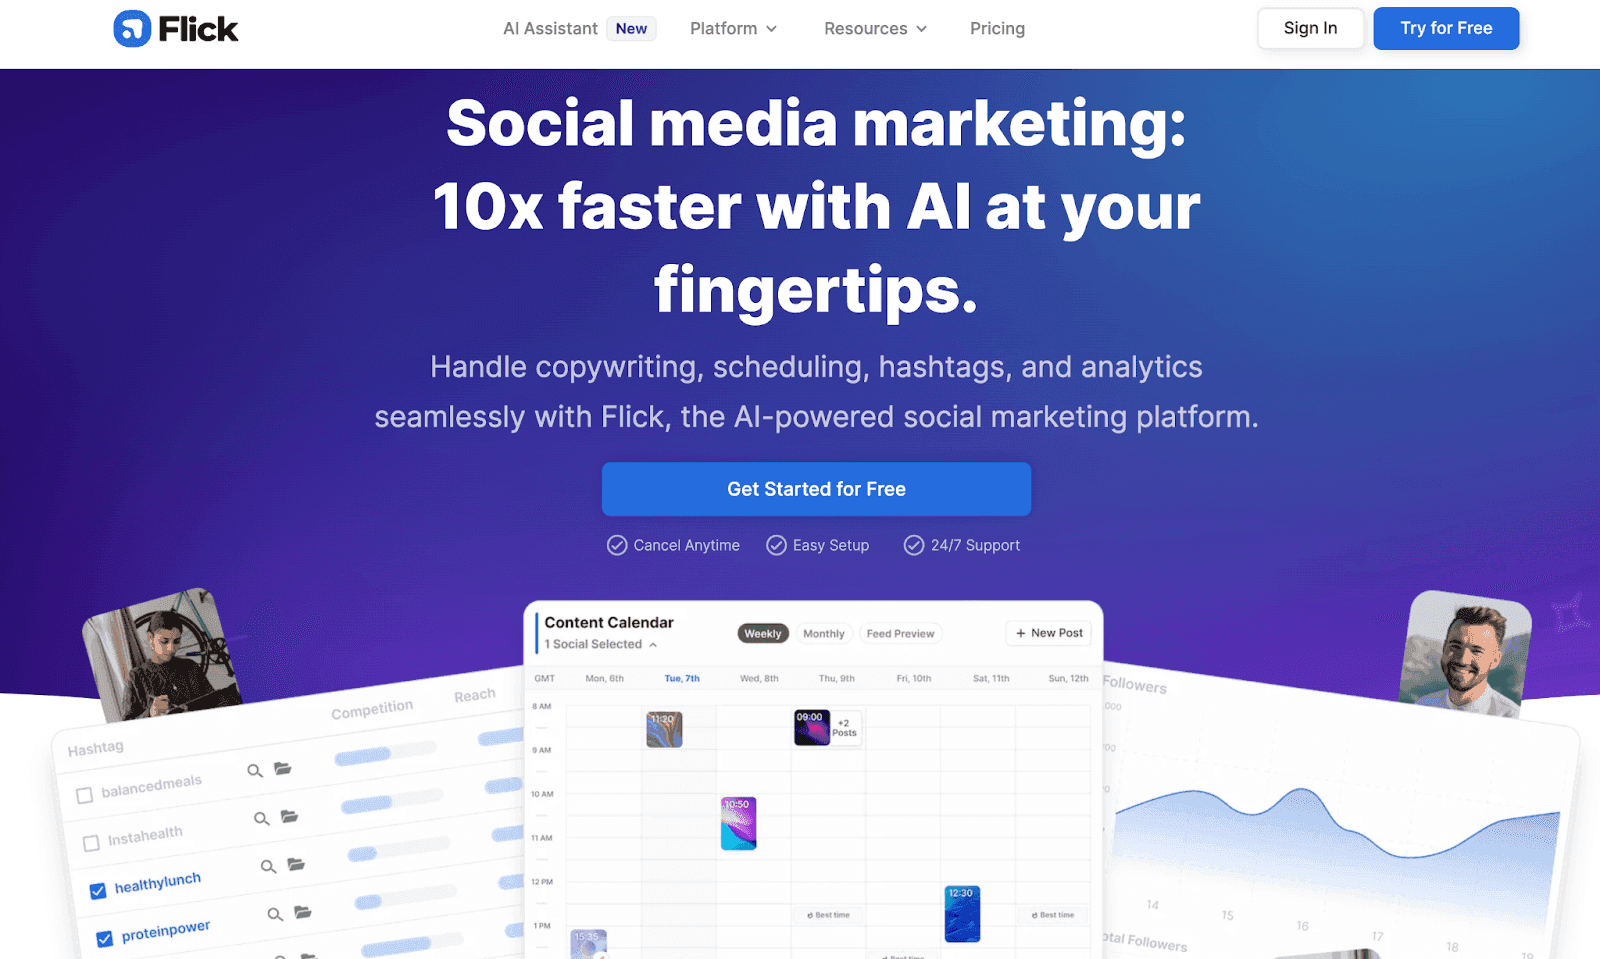 Flick AI marketing app - social media marketing: 10x faster with AI at your fingertips